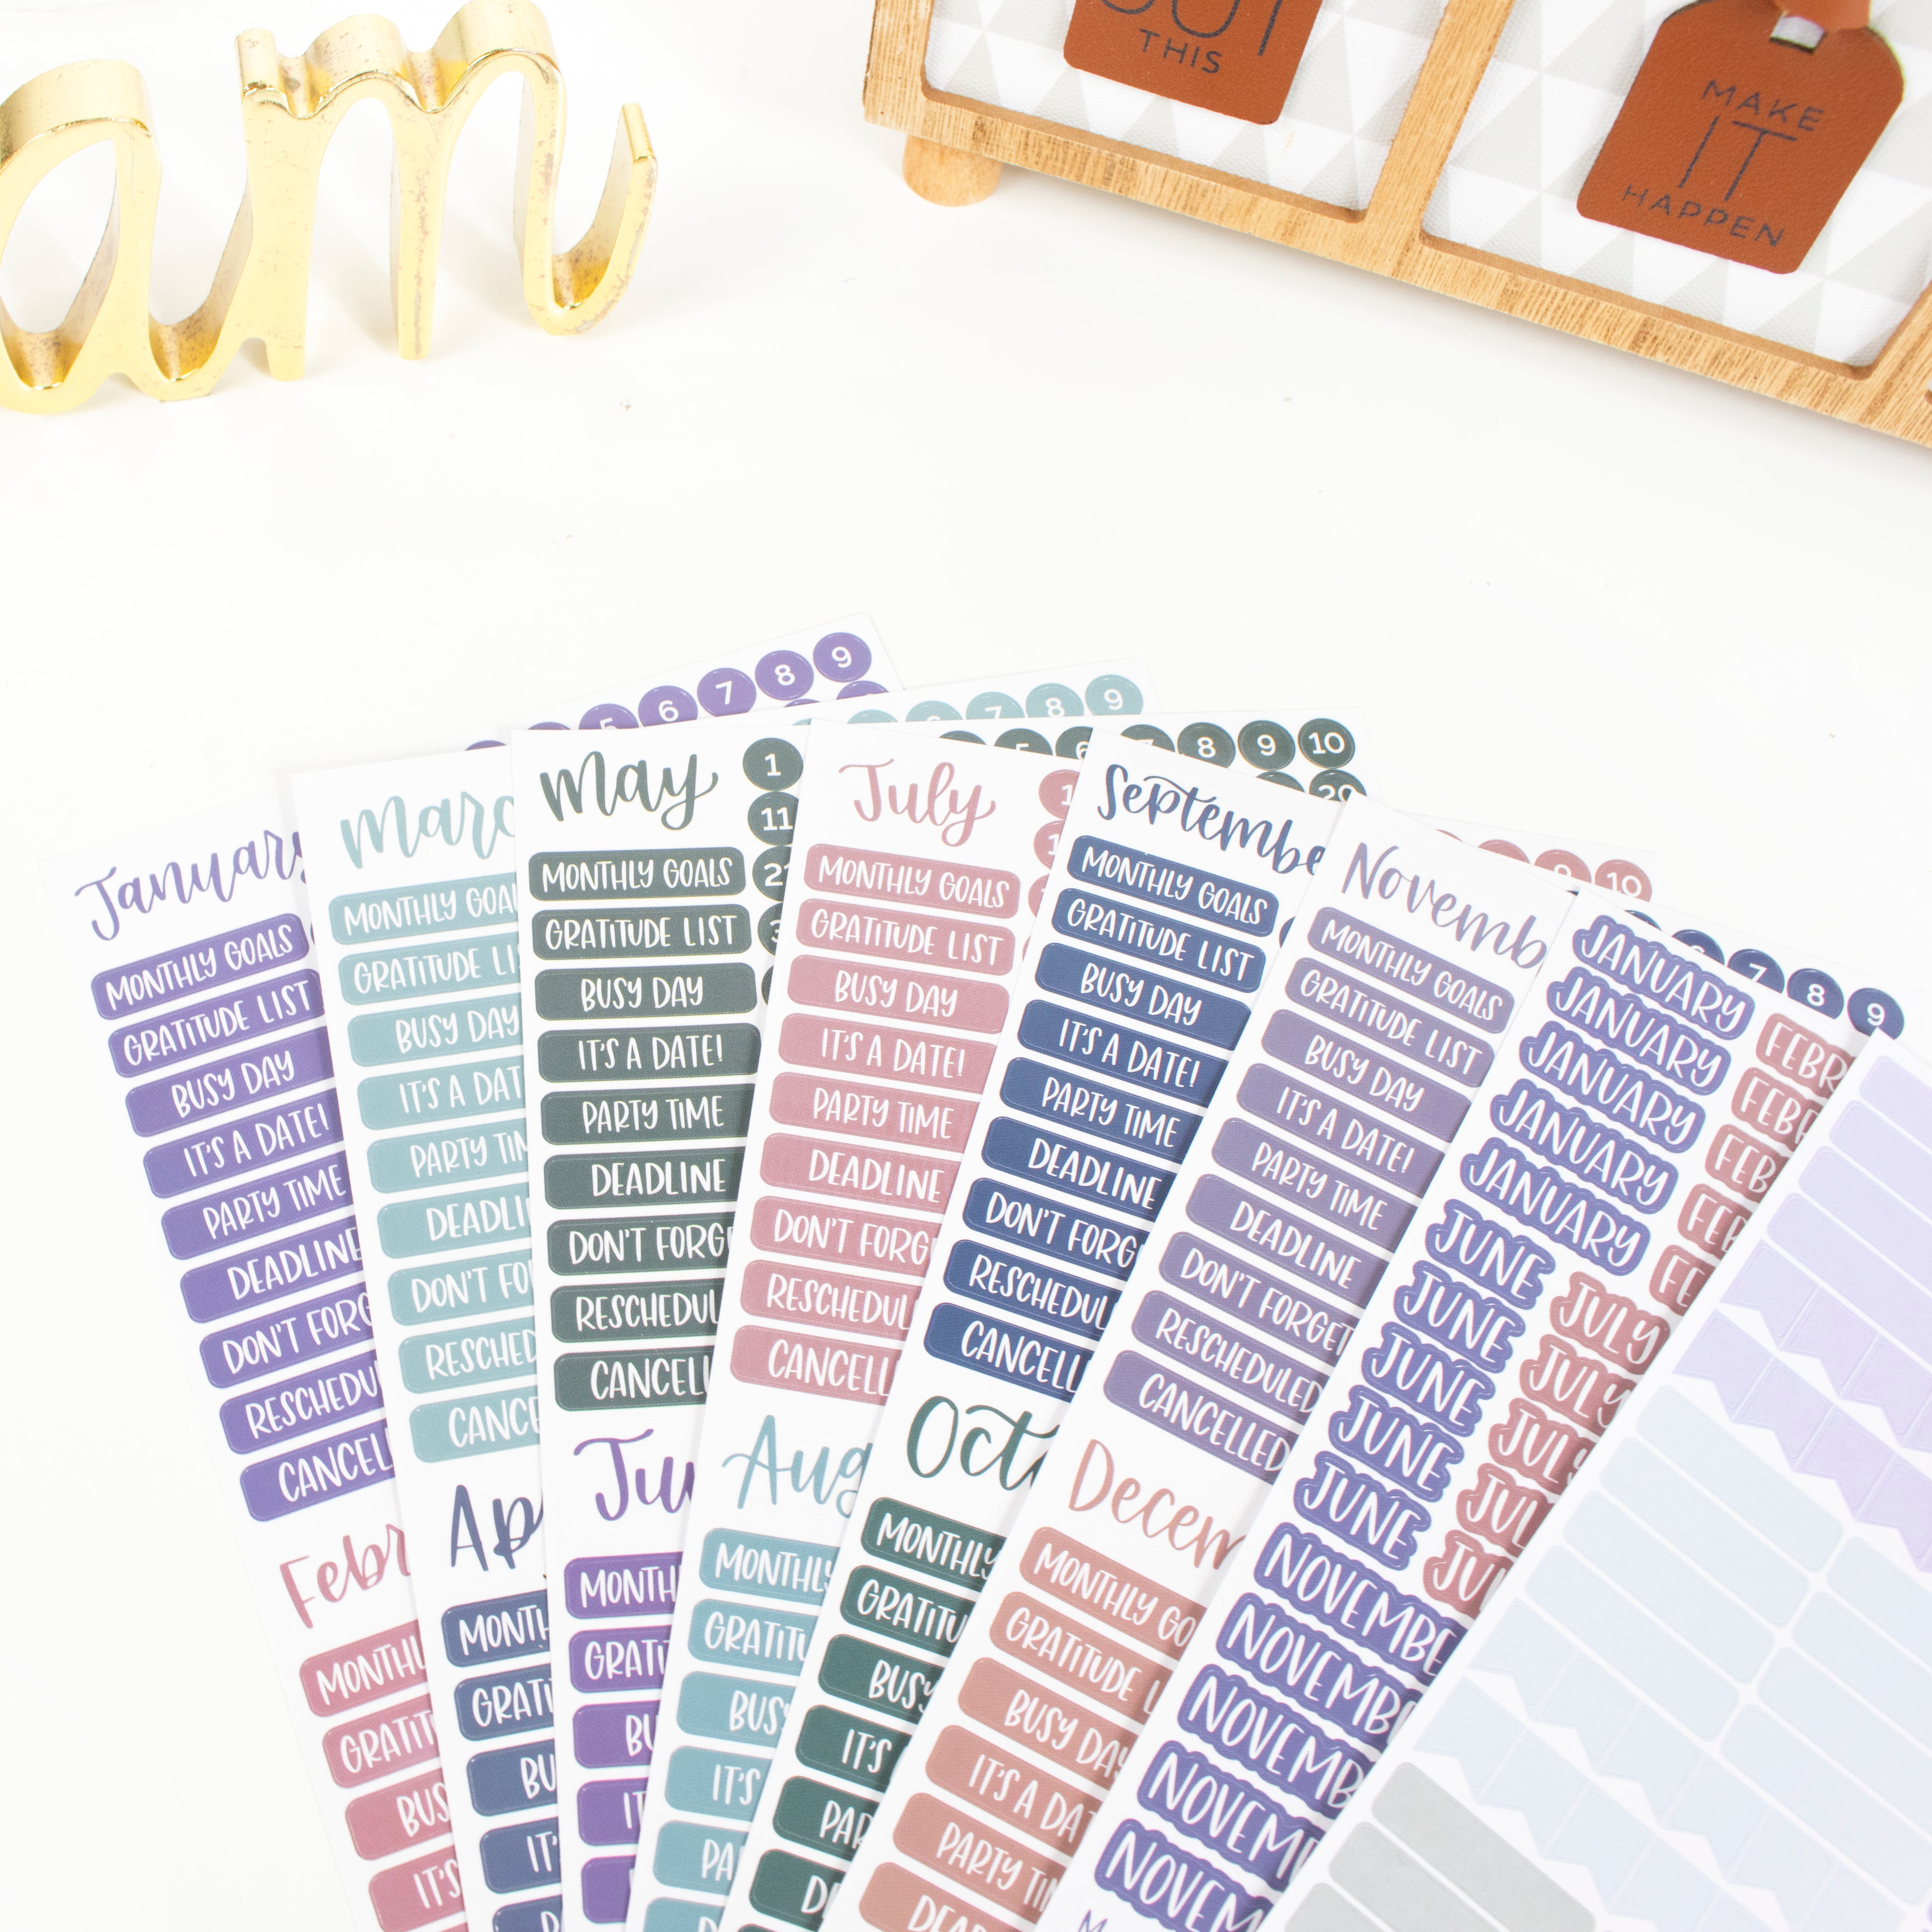 Calendar Essentials Sticker Pack by Bloom Daily Planners